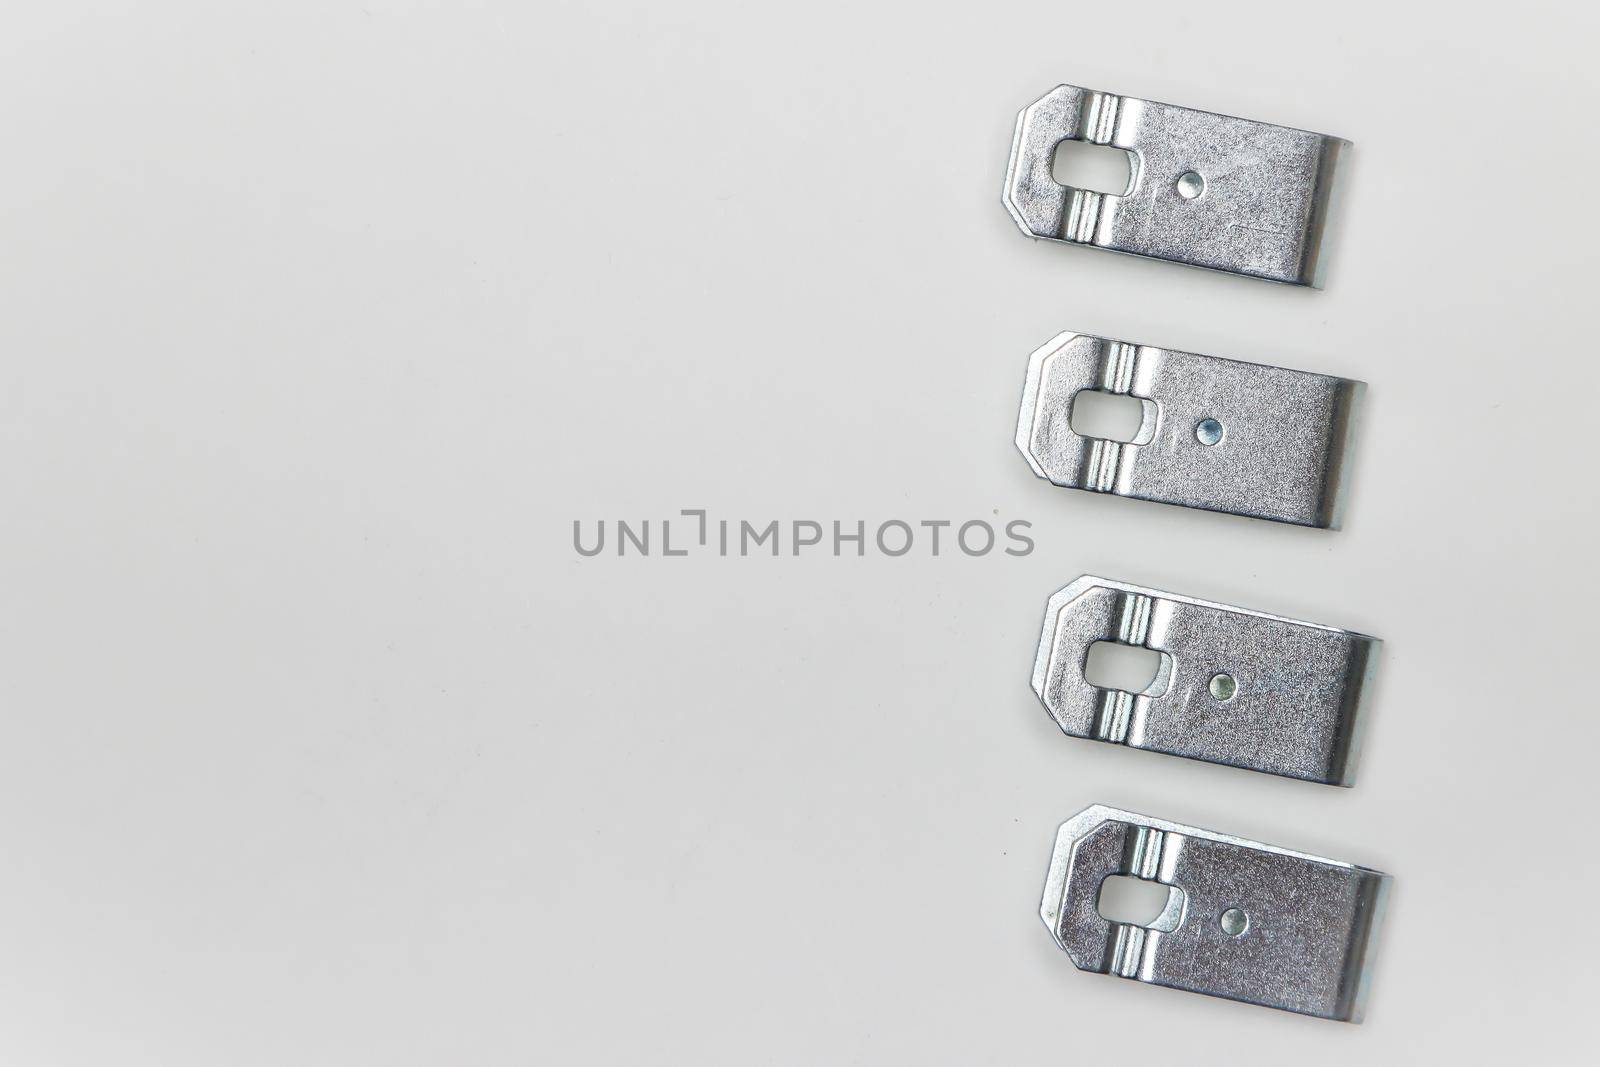 Repair kit for brakes, four metal plates - clips on the side. Set of spare parts for car brake repair. Details on white background, copy space available. UHD 4K.